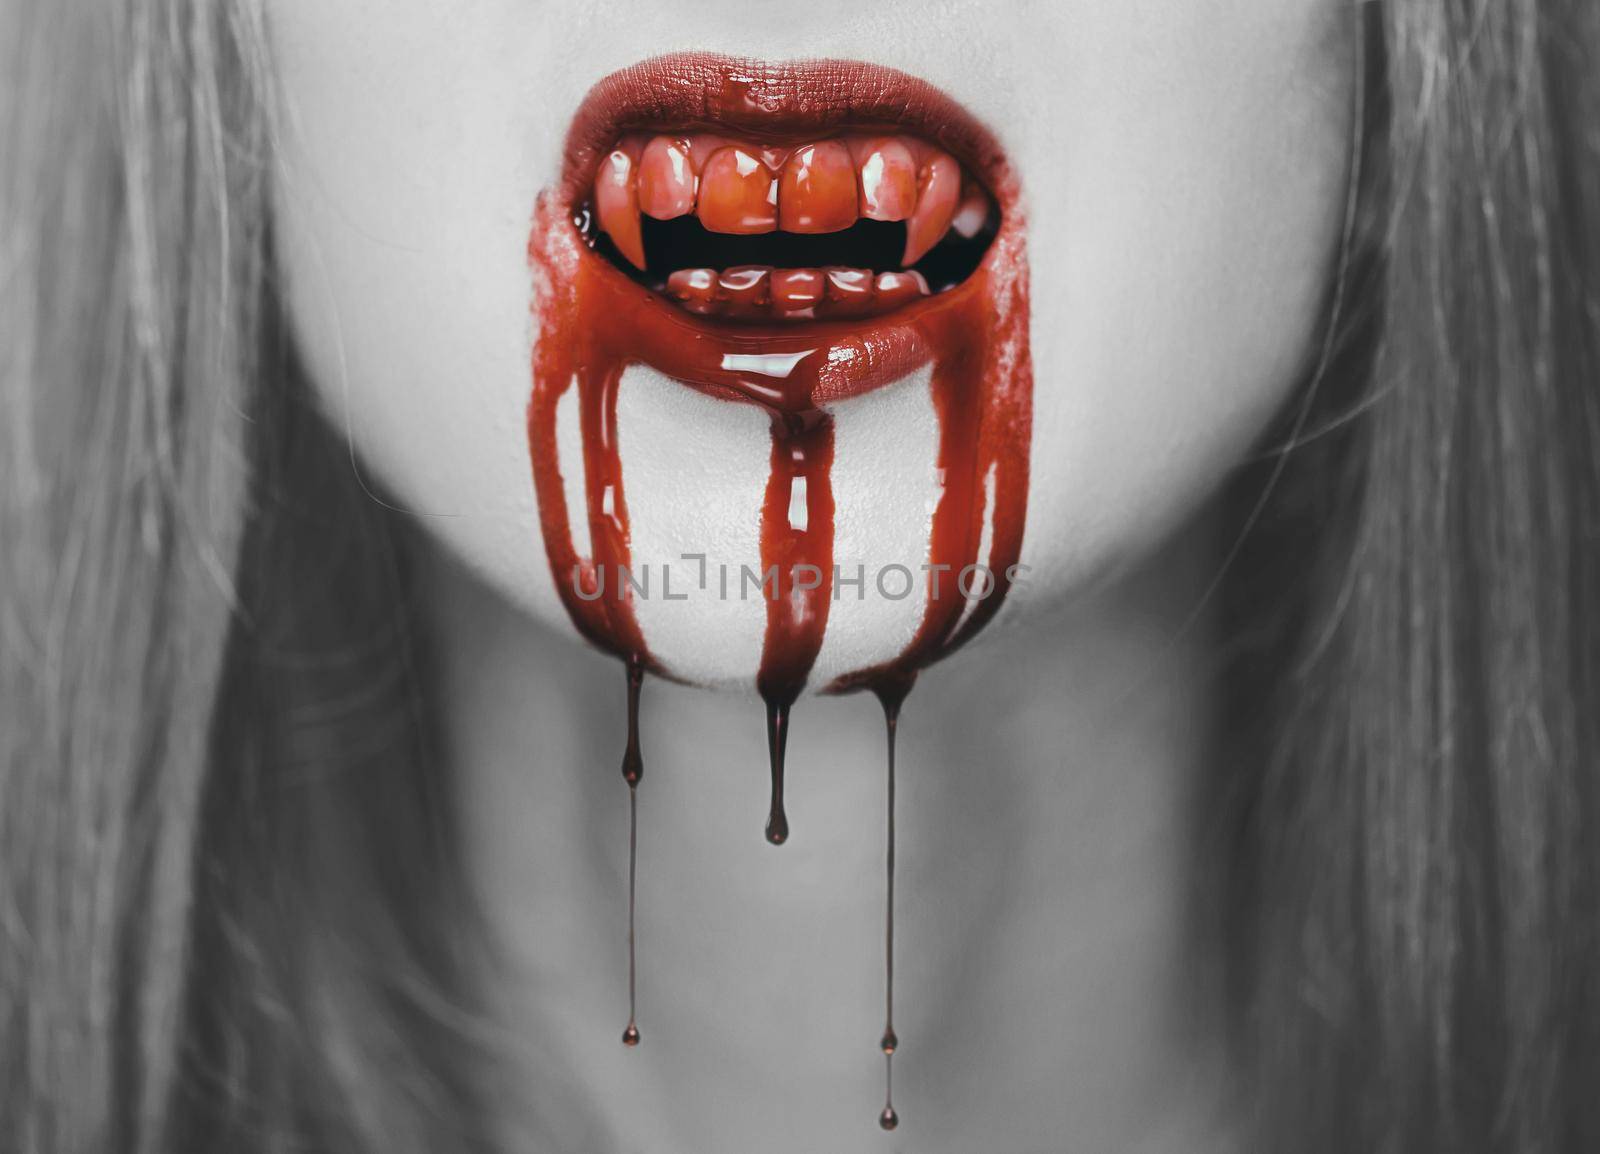 Spooky vampire woman, close-up of mouth with teeth in red blood. Halloween or horror theme. Black and white image with red elements